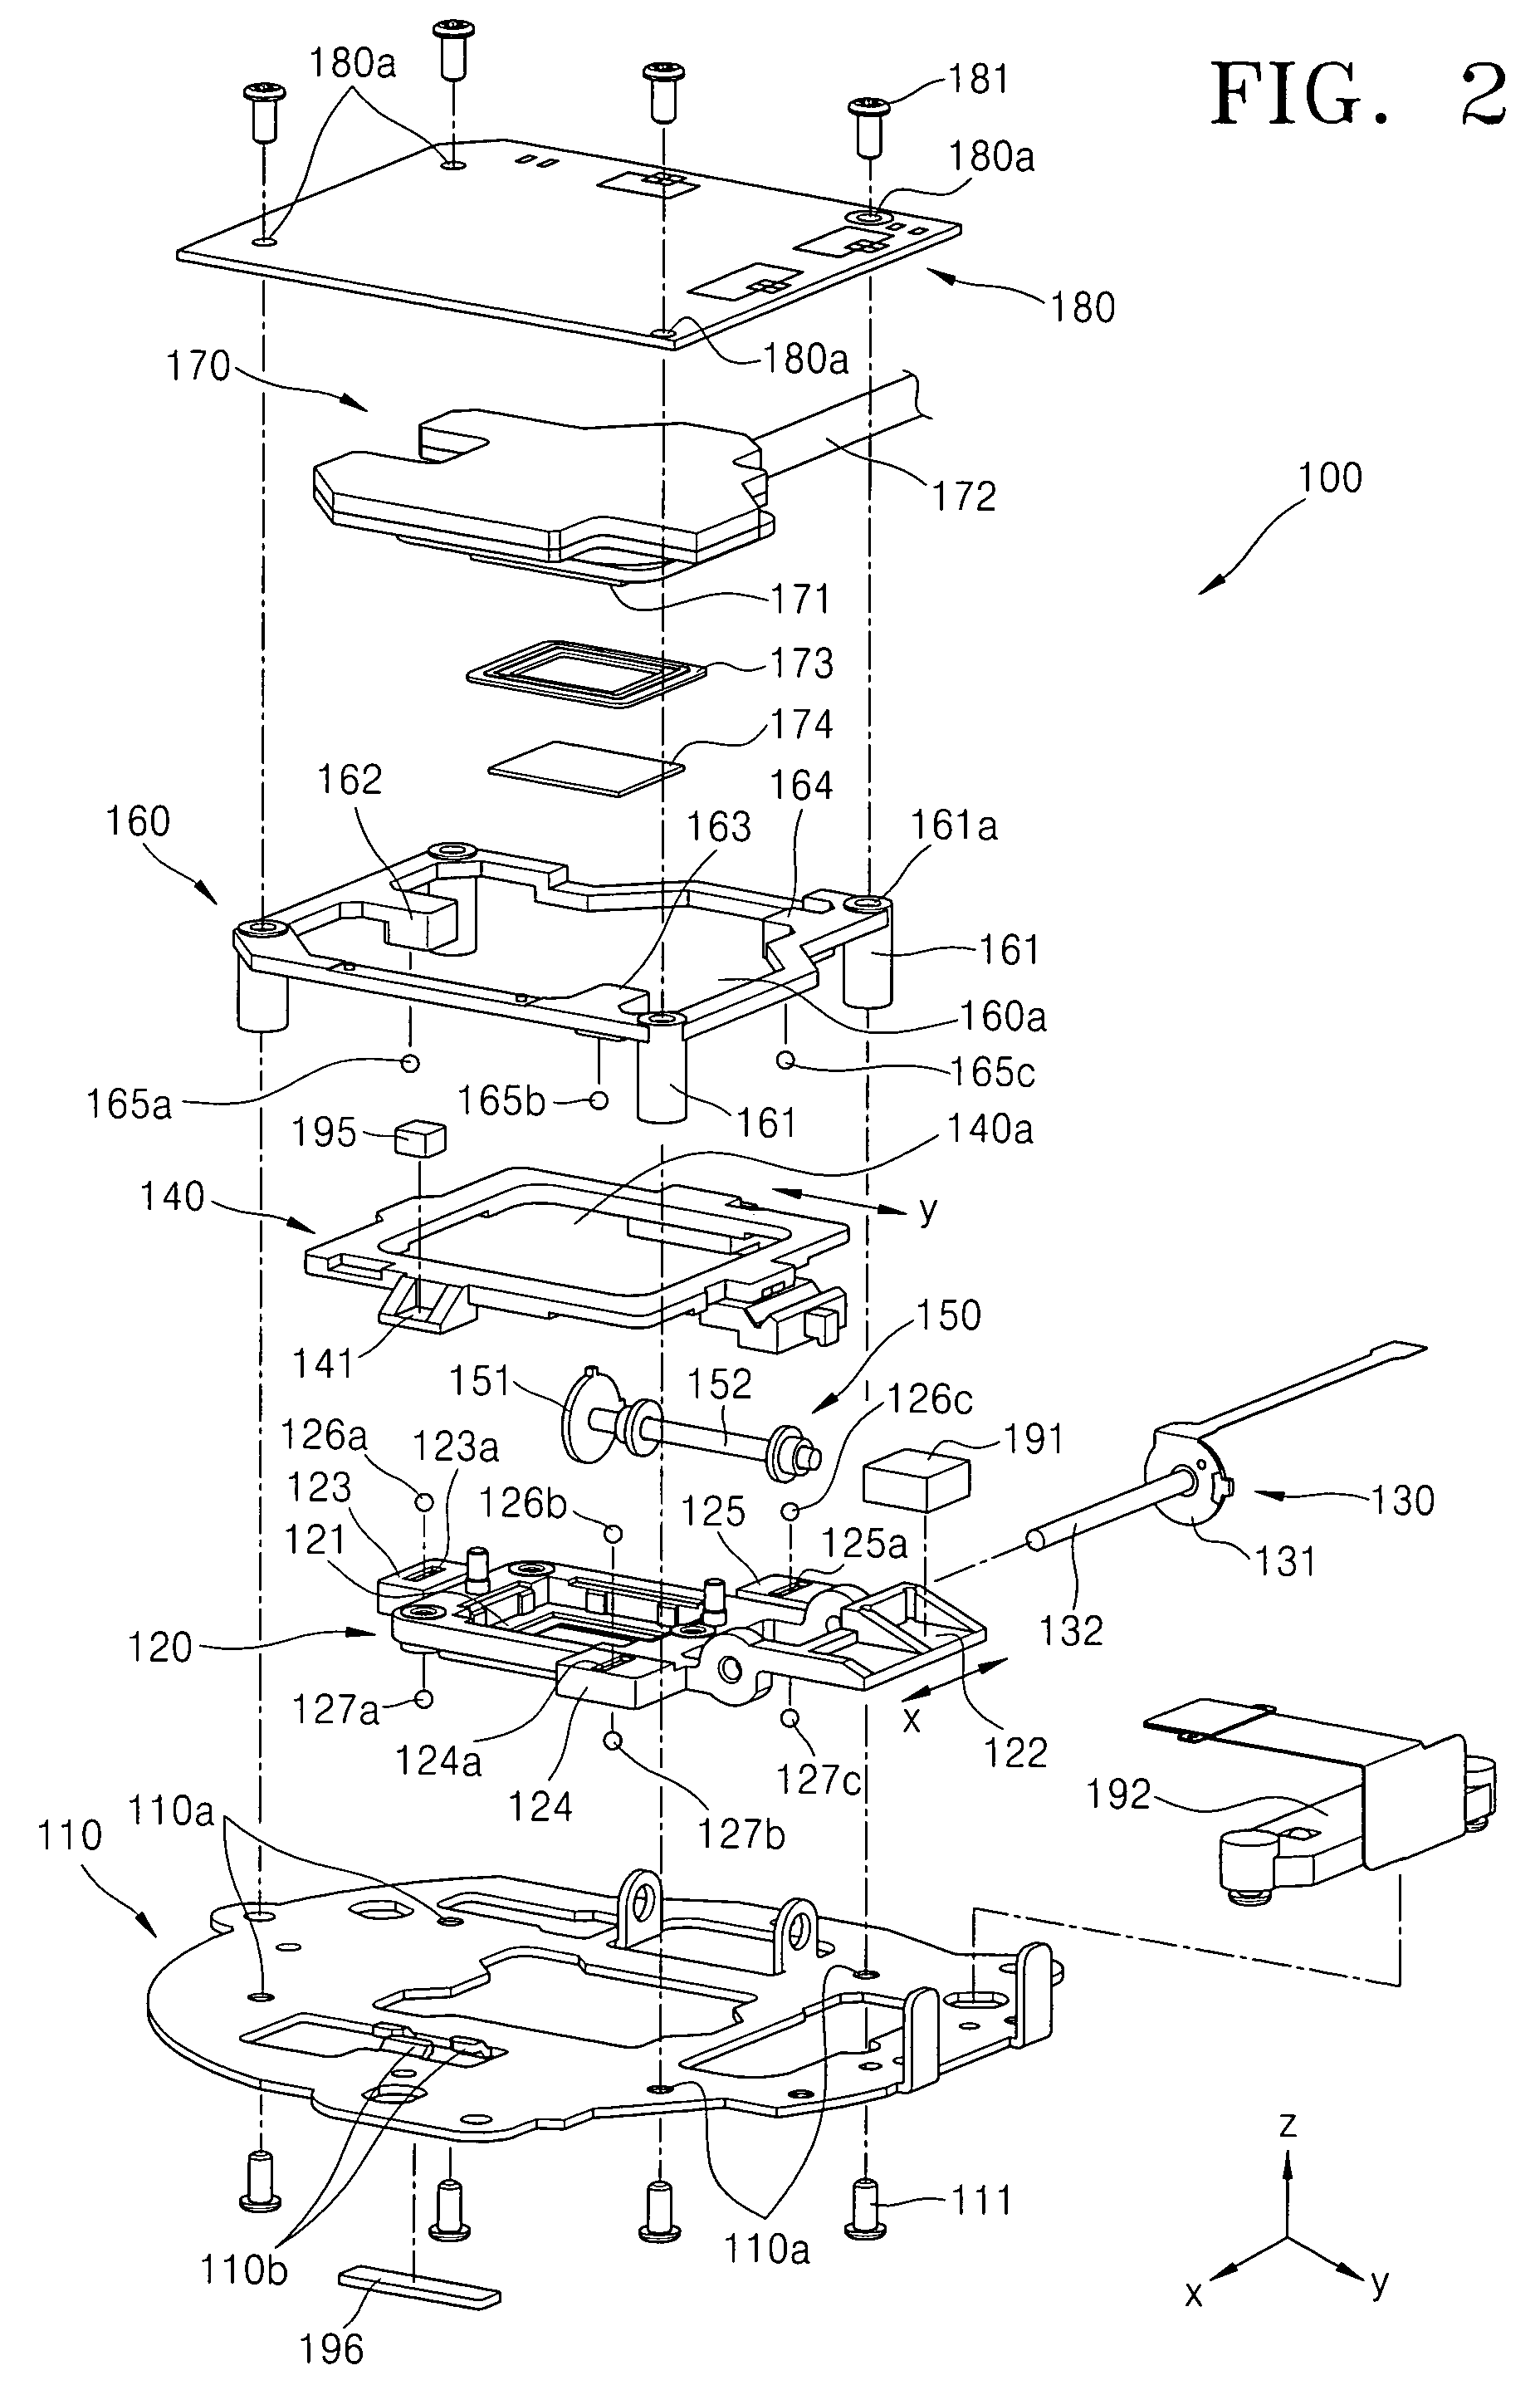 Shake correction module for photographing apparatus